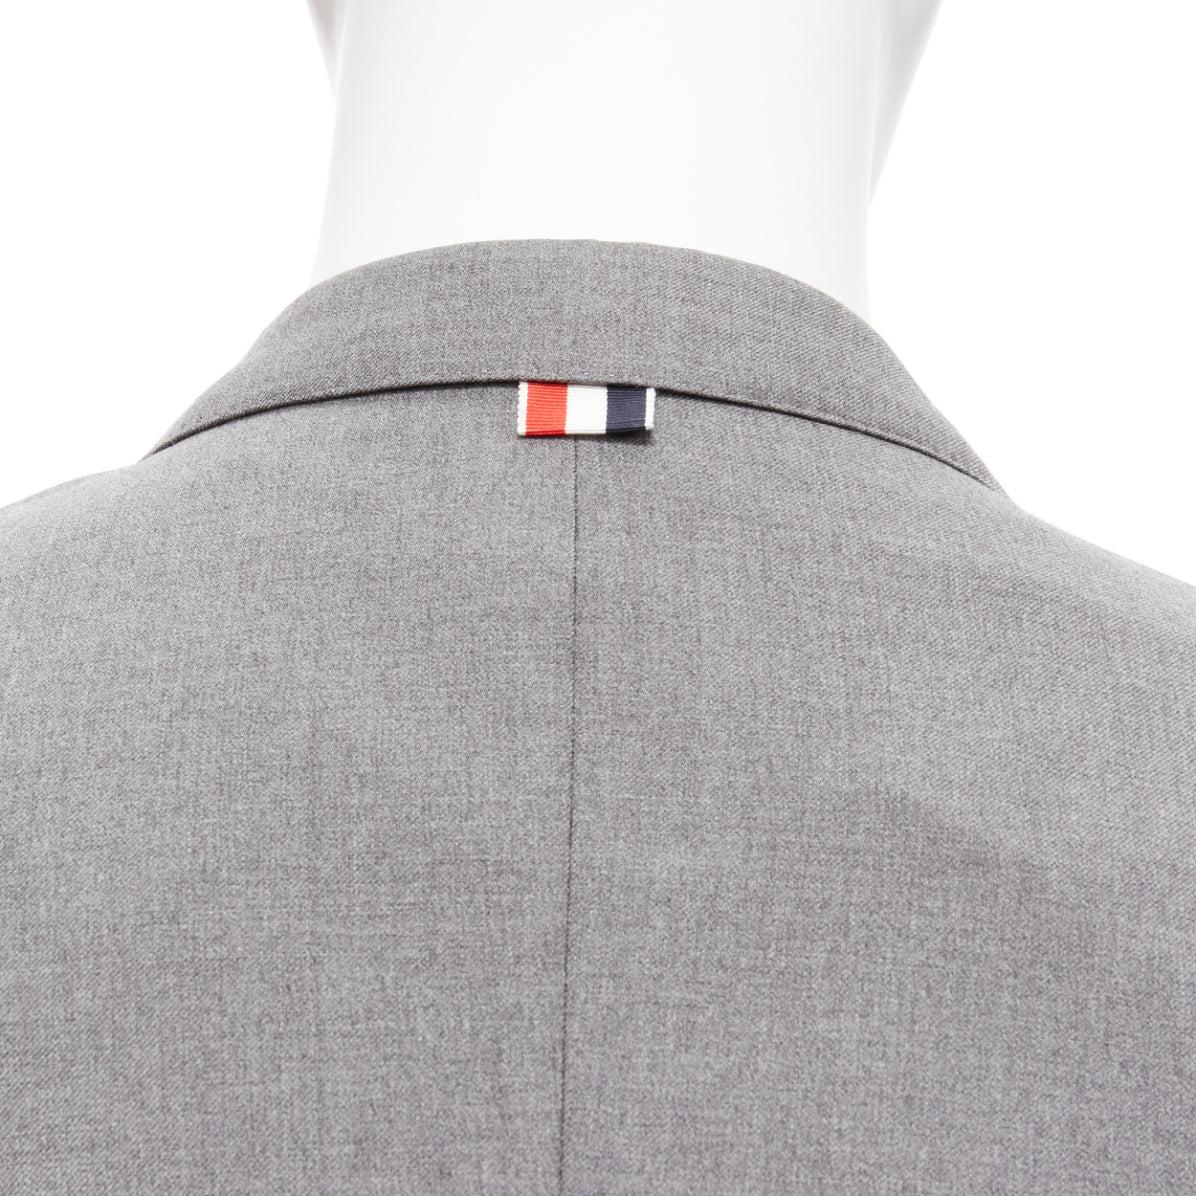 THOM BROWNE 100% wool grey single breast 2-button blazer pants suit SZ. 3 L
Reference: JSLE/A00076
Brand: Thom Browne
Designer: Thom Browne
Material: Wool
Color: Grey
Pattern: Solid
Closure: Button
Lining: Black Fabric
Extra Details: TB signature